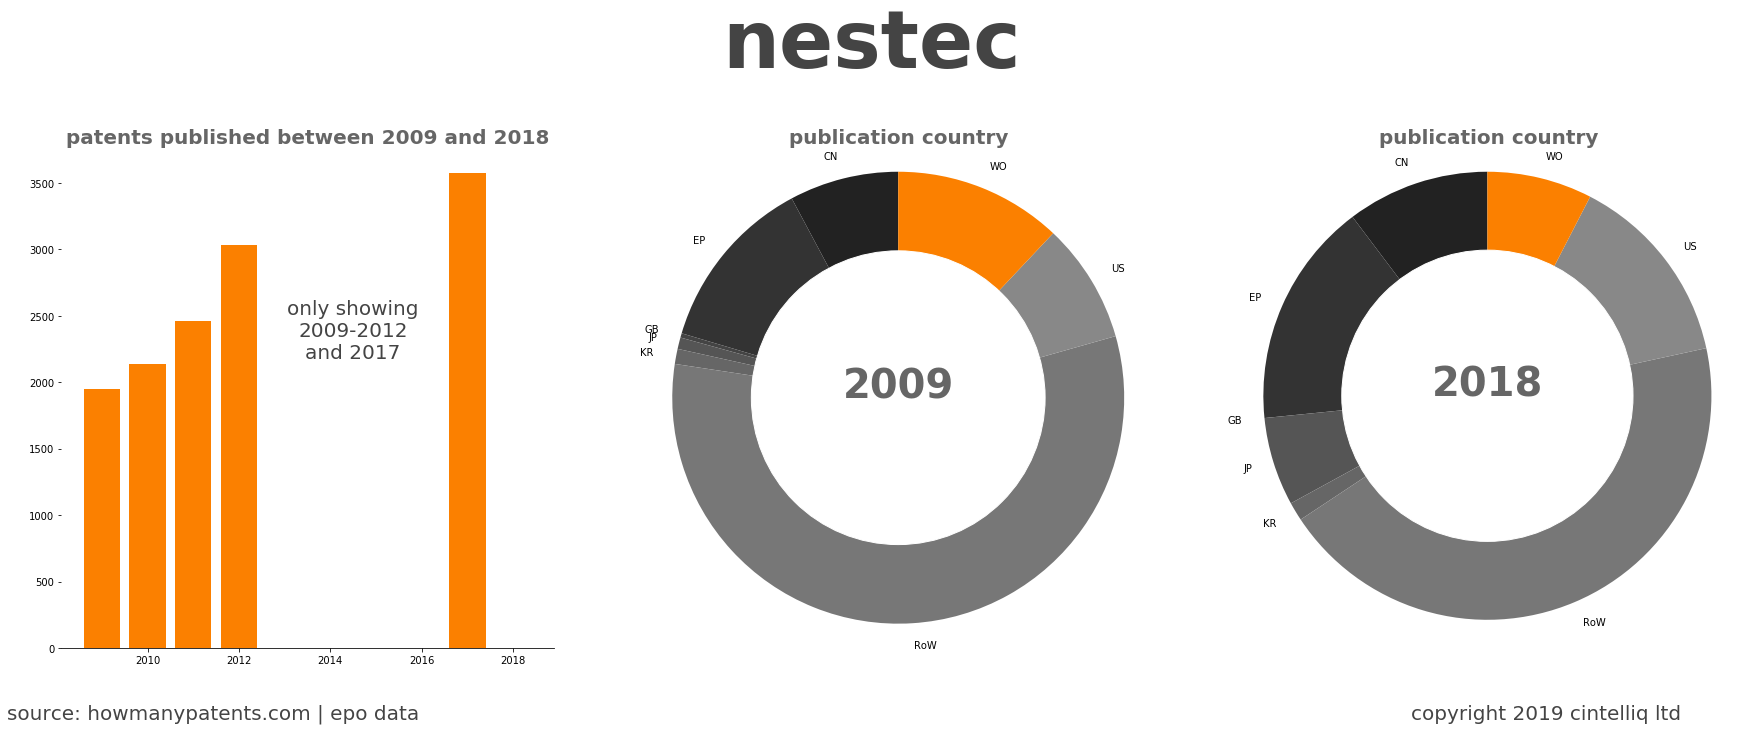 summary of patents for Nestec